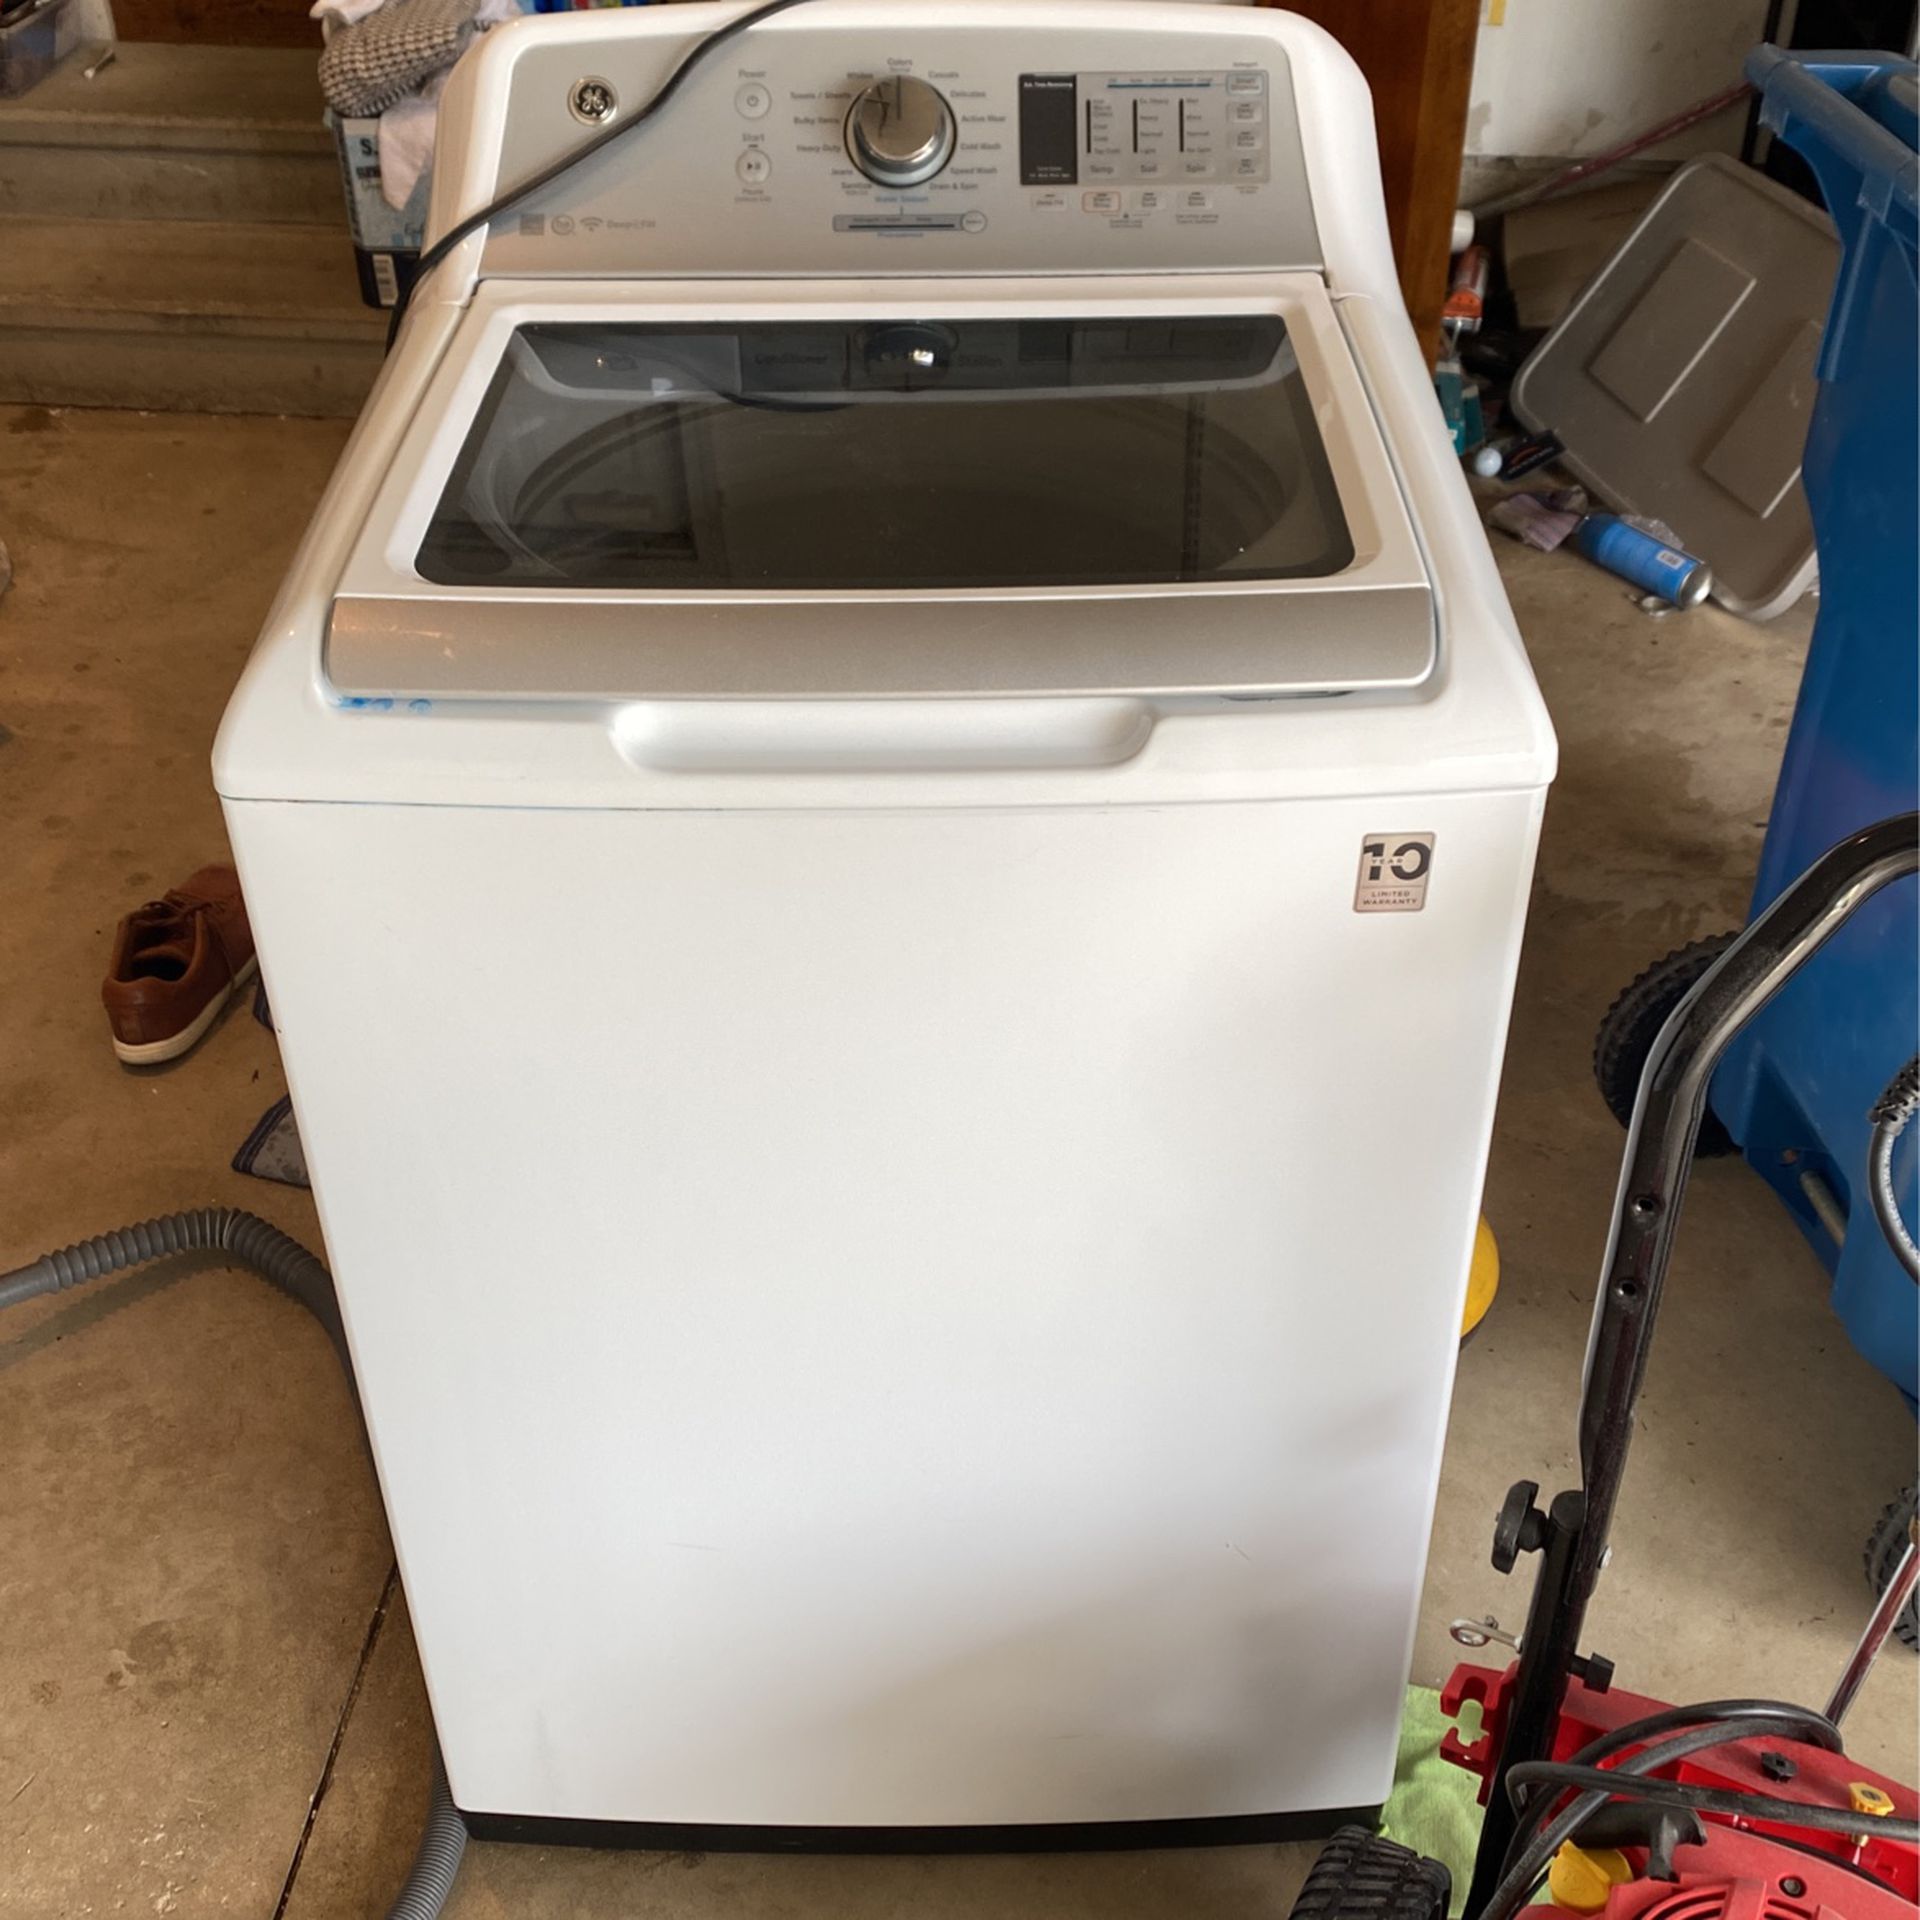 Used GE Washing Machine Whirlpool Dishwasher And Kitchen Aid Oven With range And Hood.  $150 For All 3